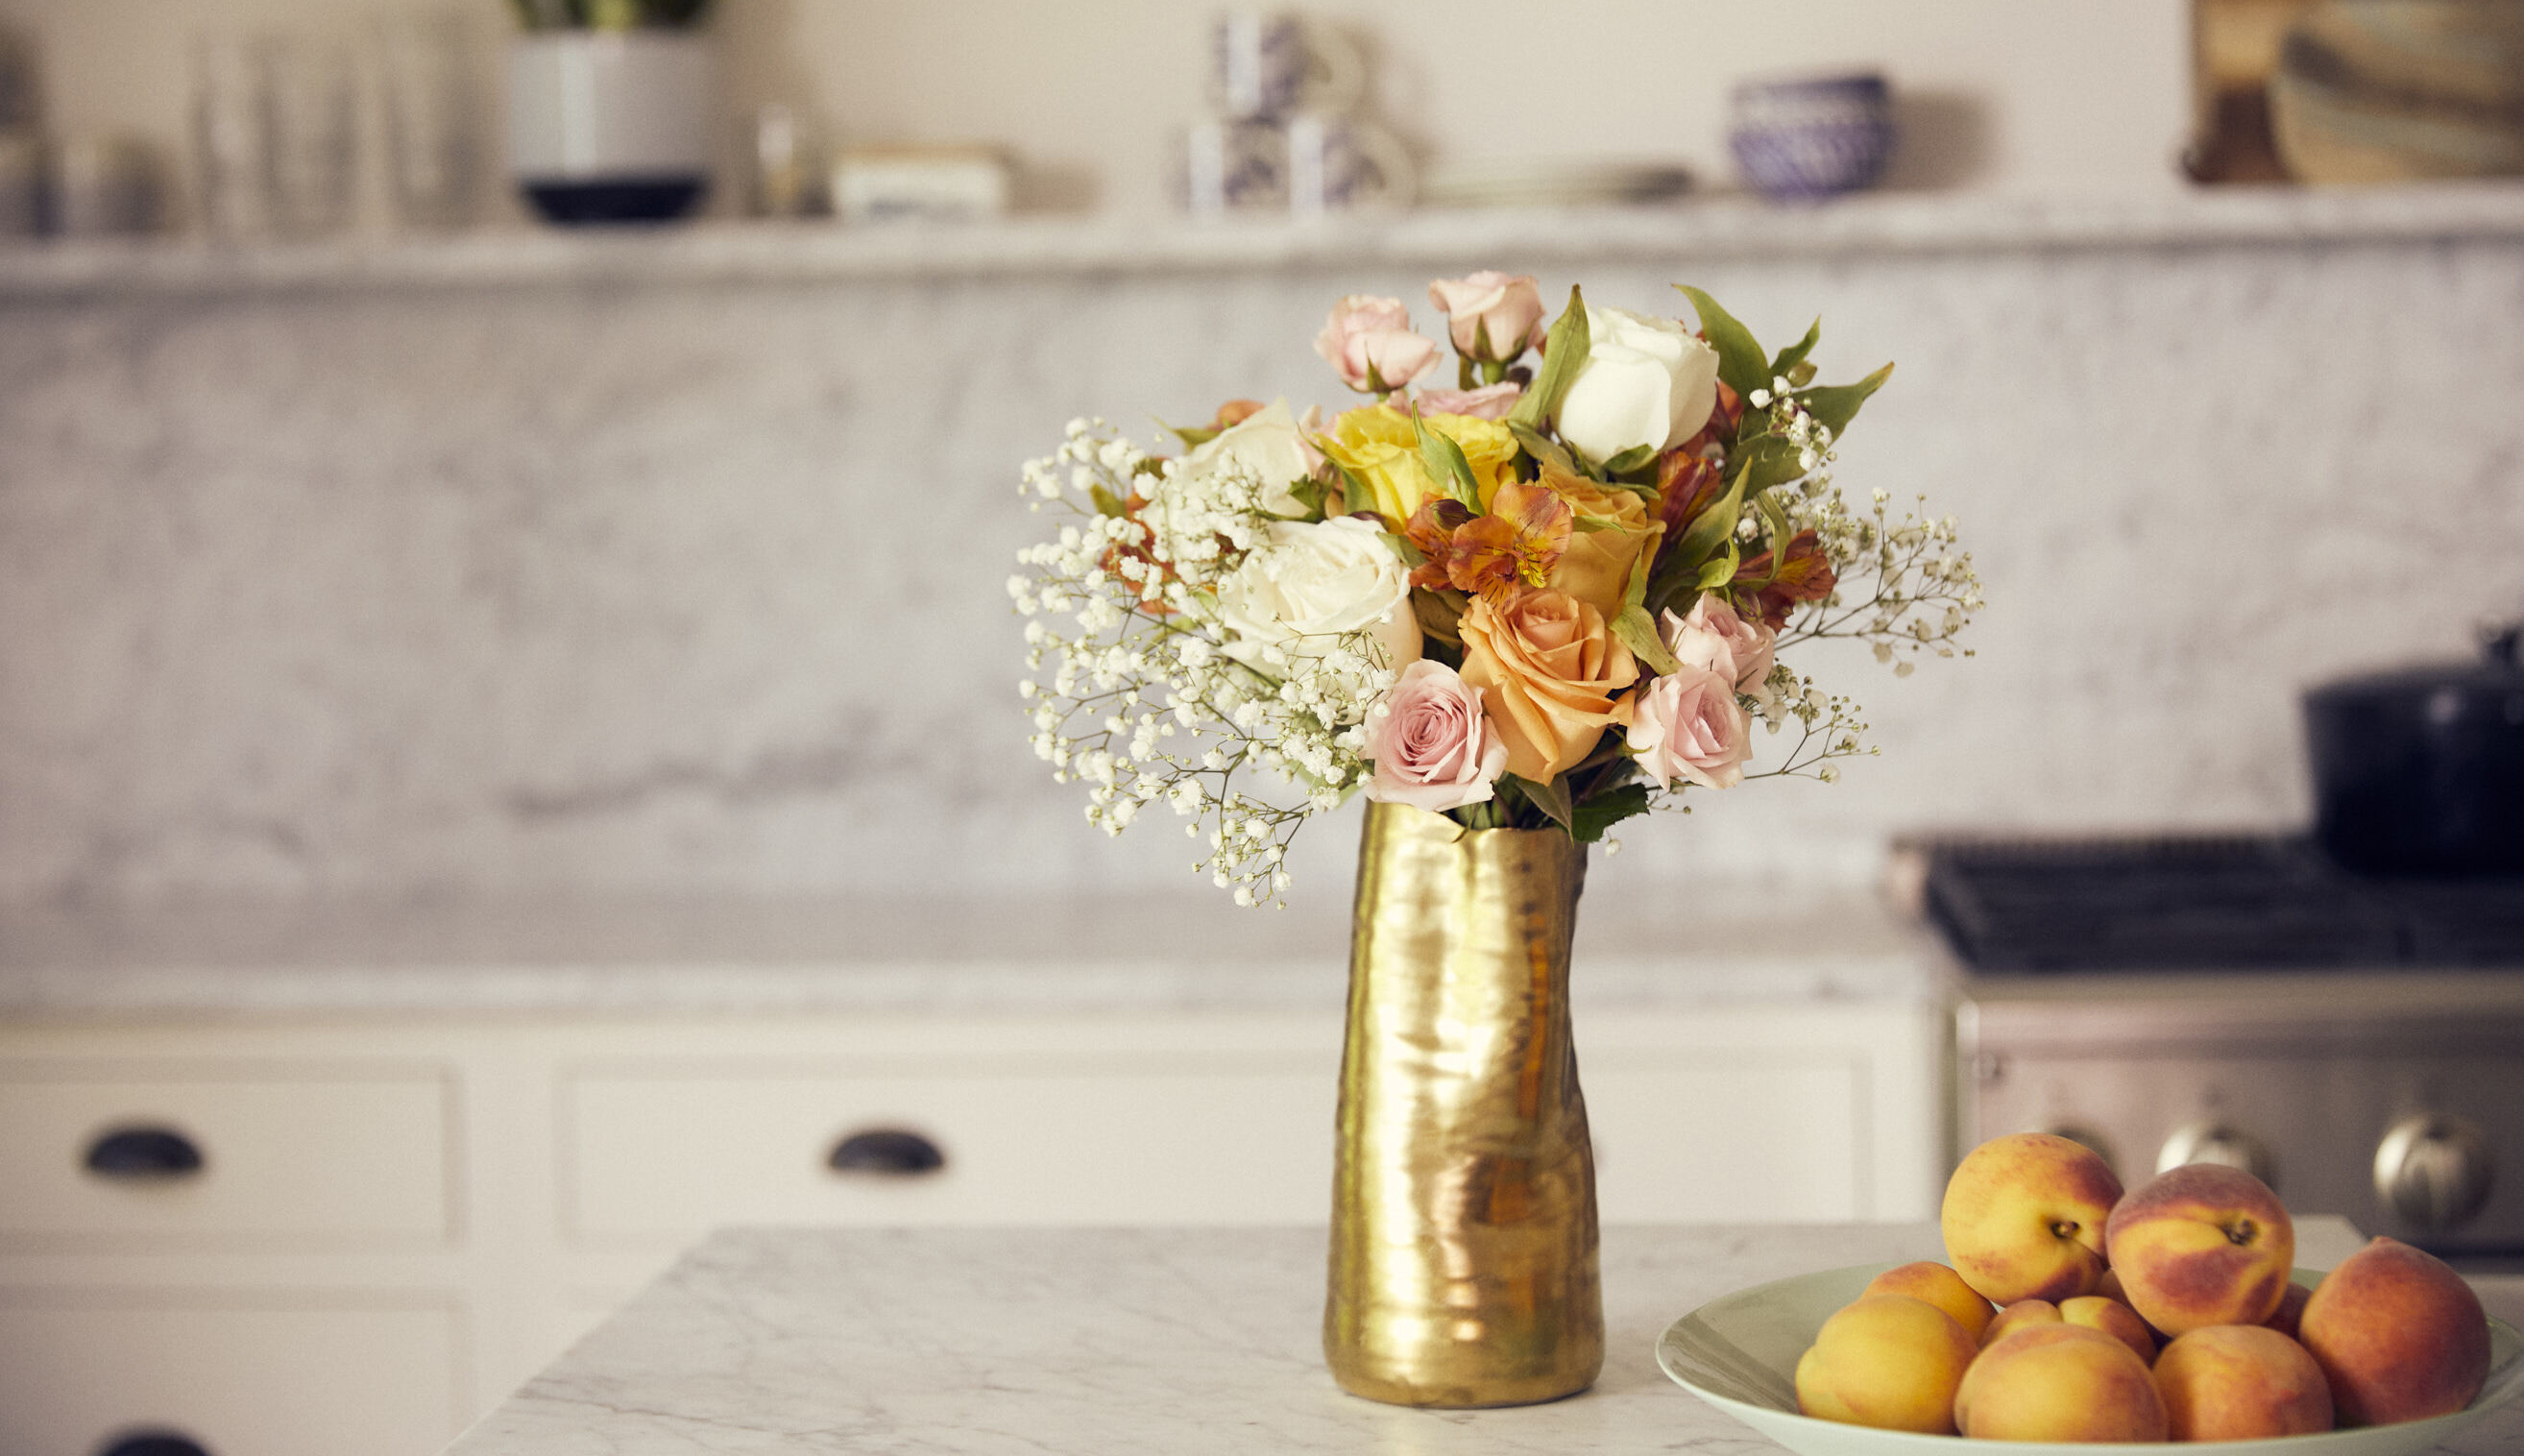 Bouquet of flowers in a gold vase on countertop